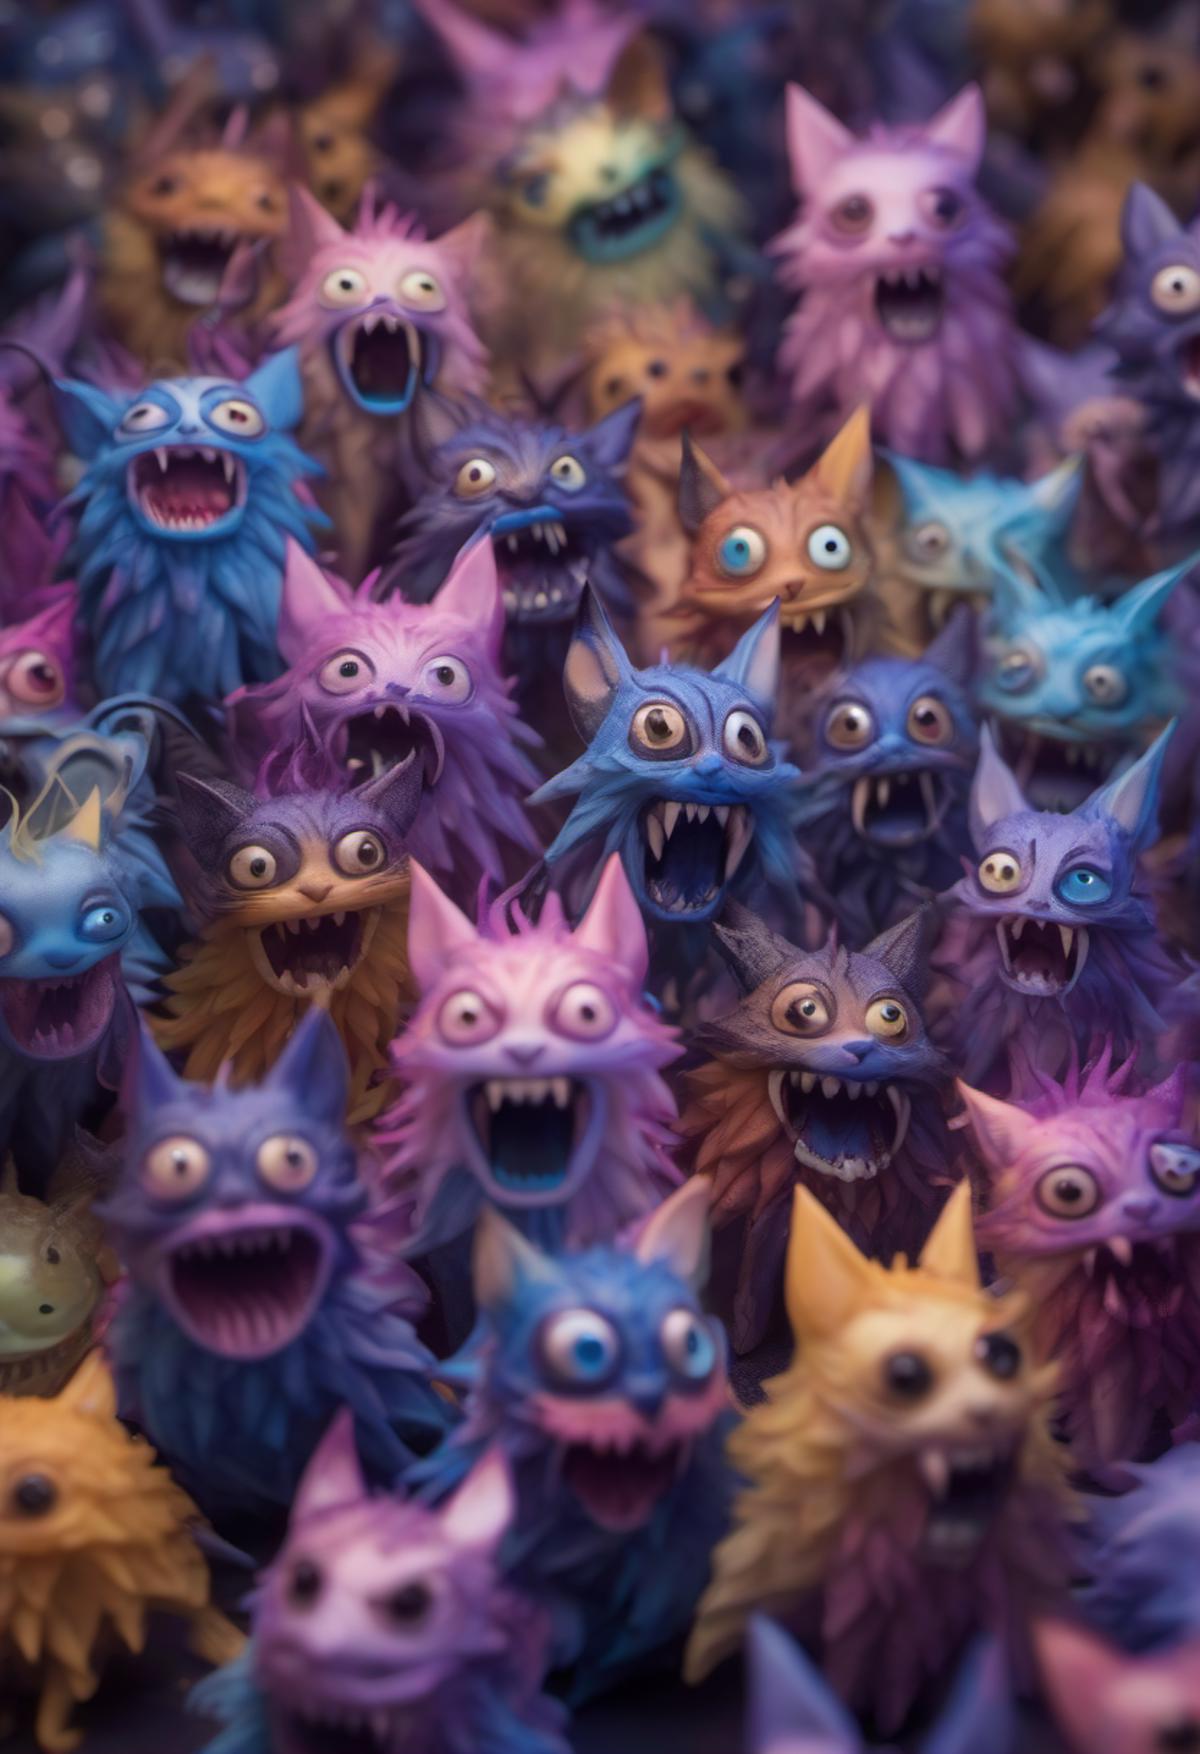 A group of colorful cat figurines with big eyes and open mouths.